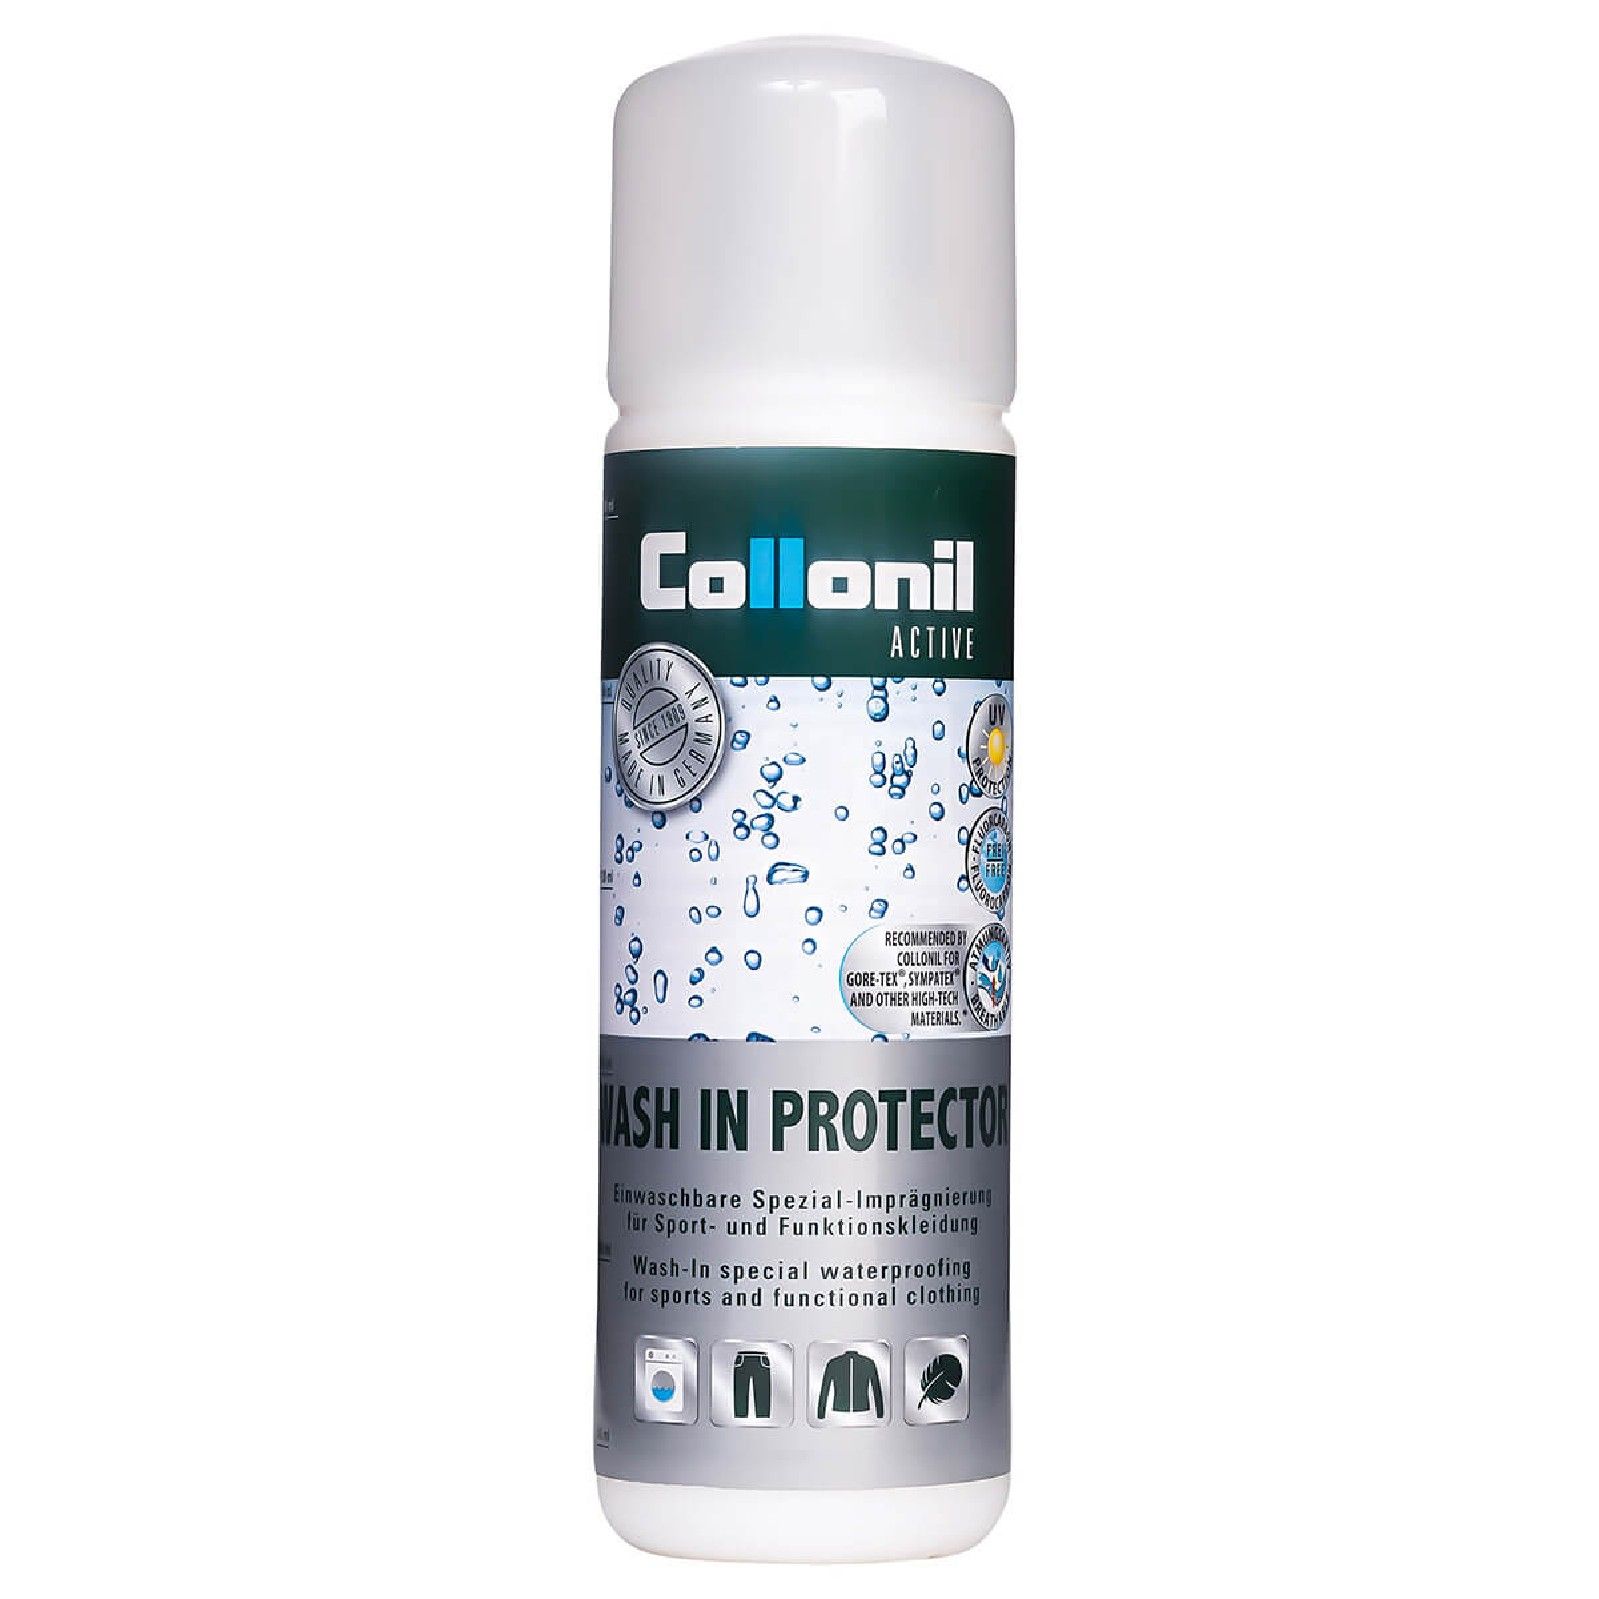 Collonil Activ Wash in Protector 250 ml